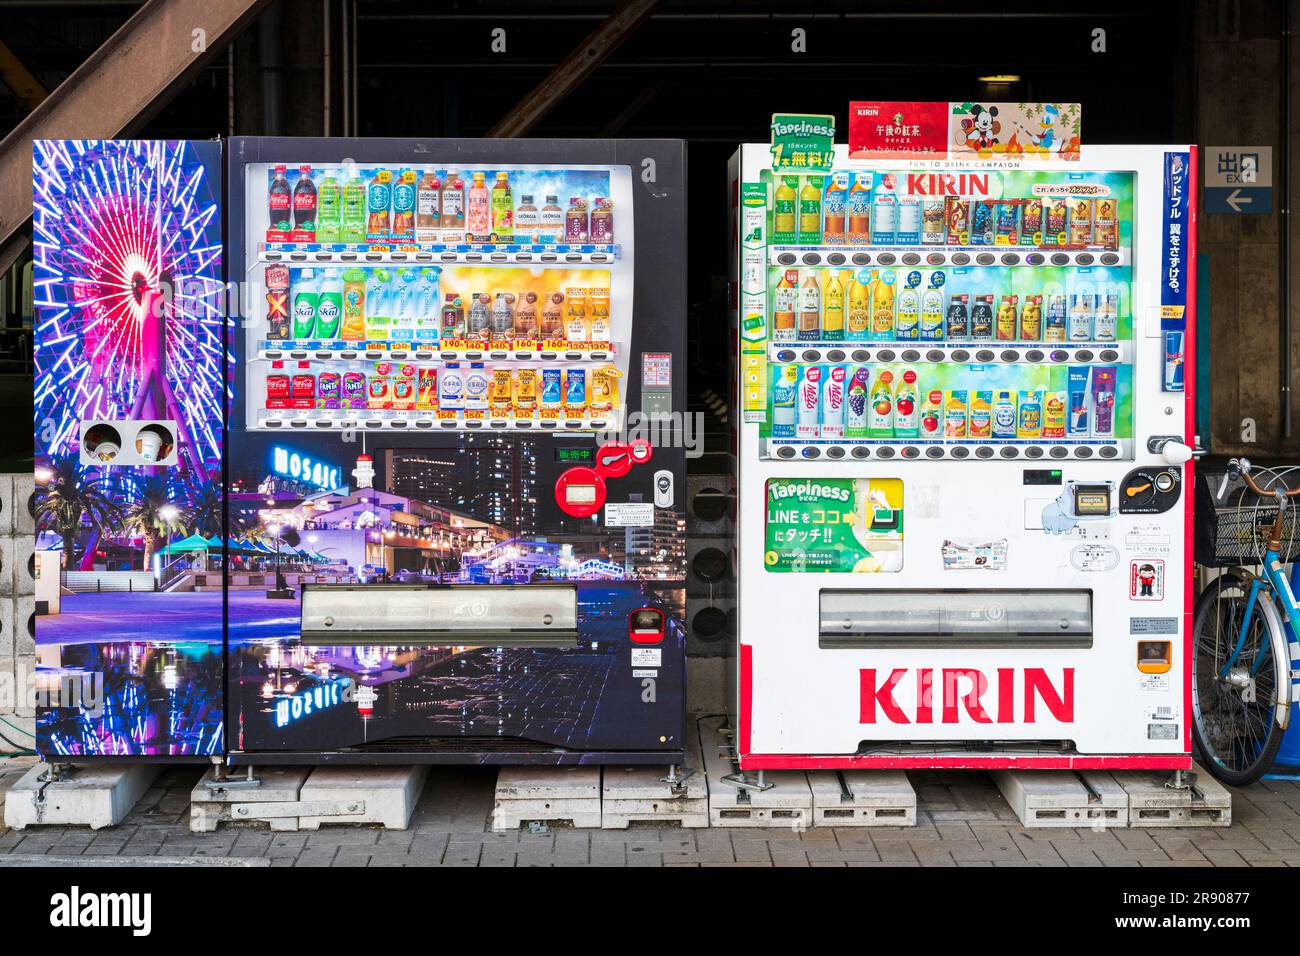 Two Japanese drink vending machines side by side. A Kirin drink company machine, the other a mosaic themed machine as part of Harborland area at Kobe. Stock Photo